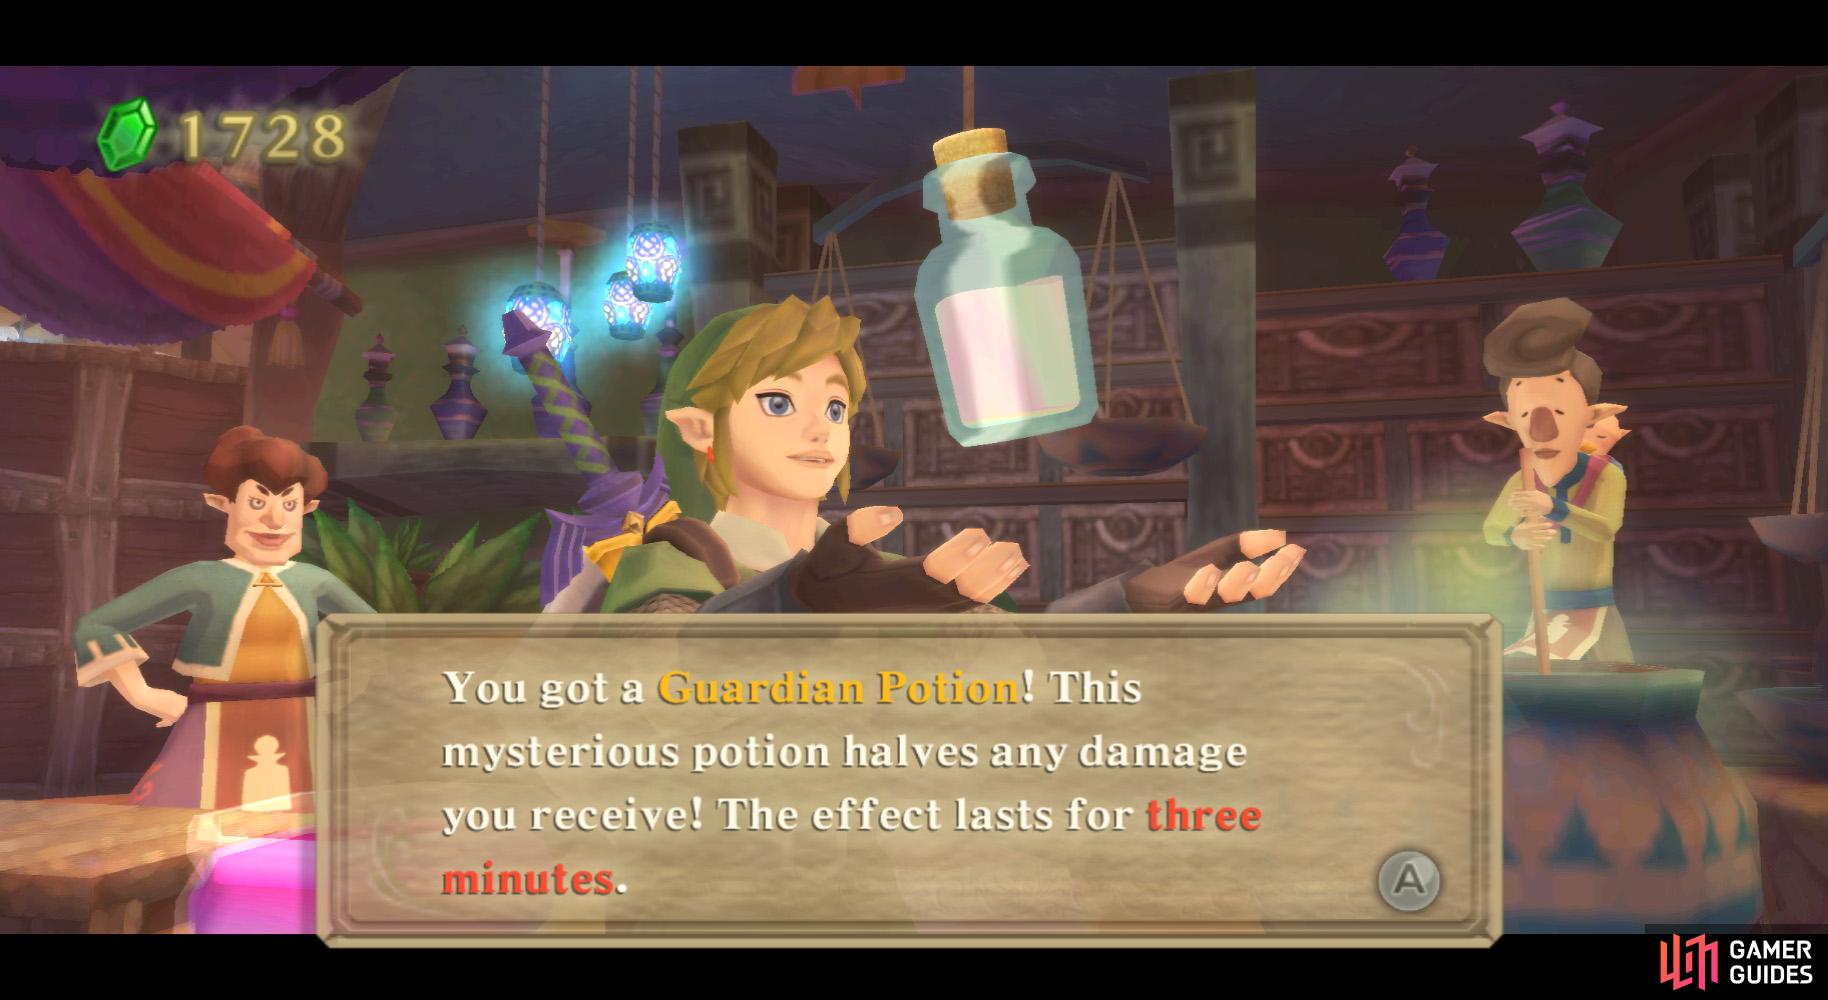 If youre out of ideas for what to fill your Bottles with, visit the Potion Shop.